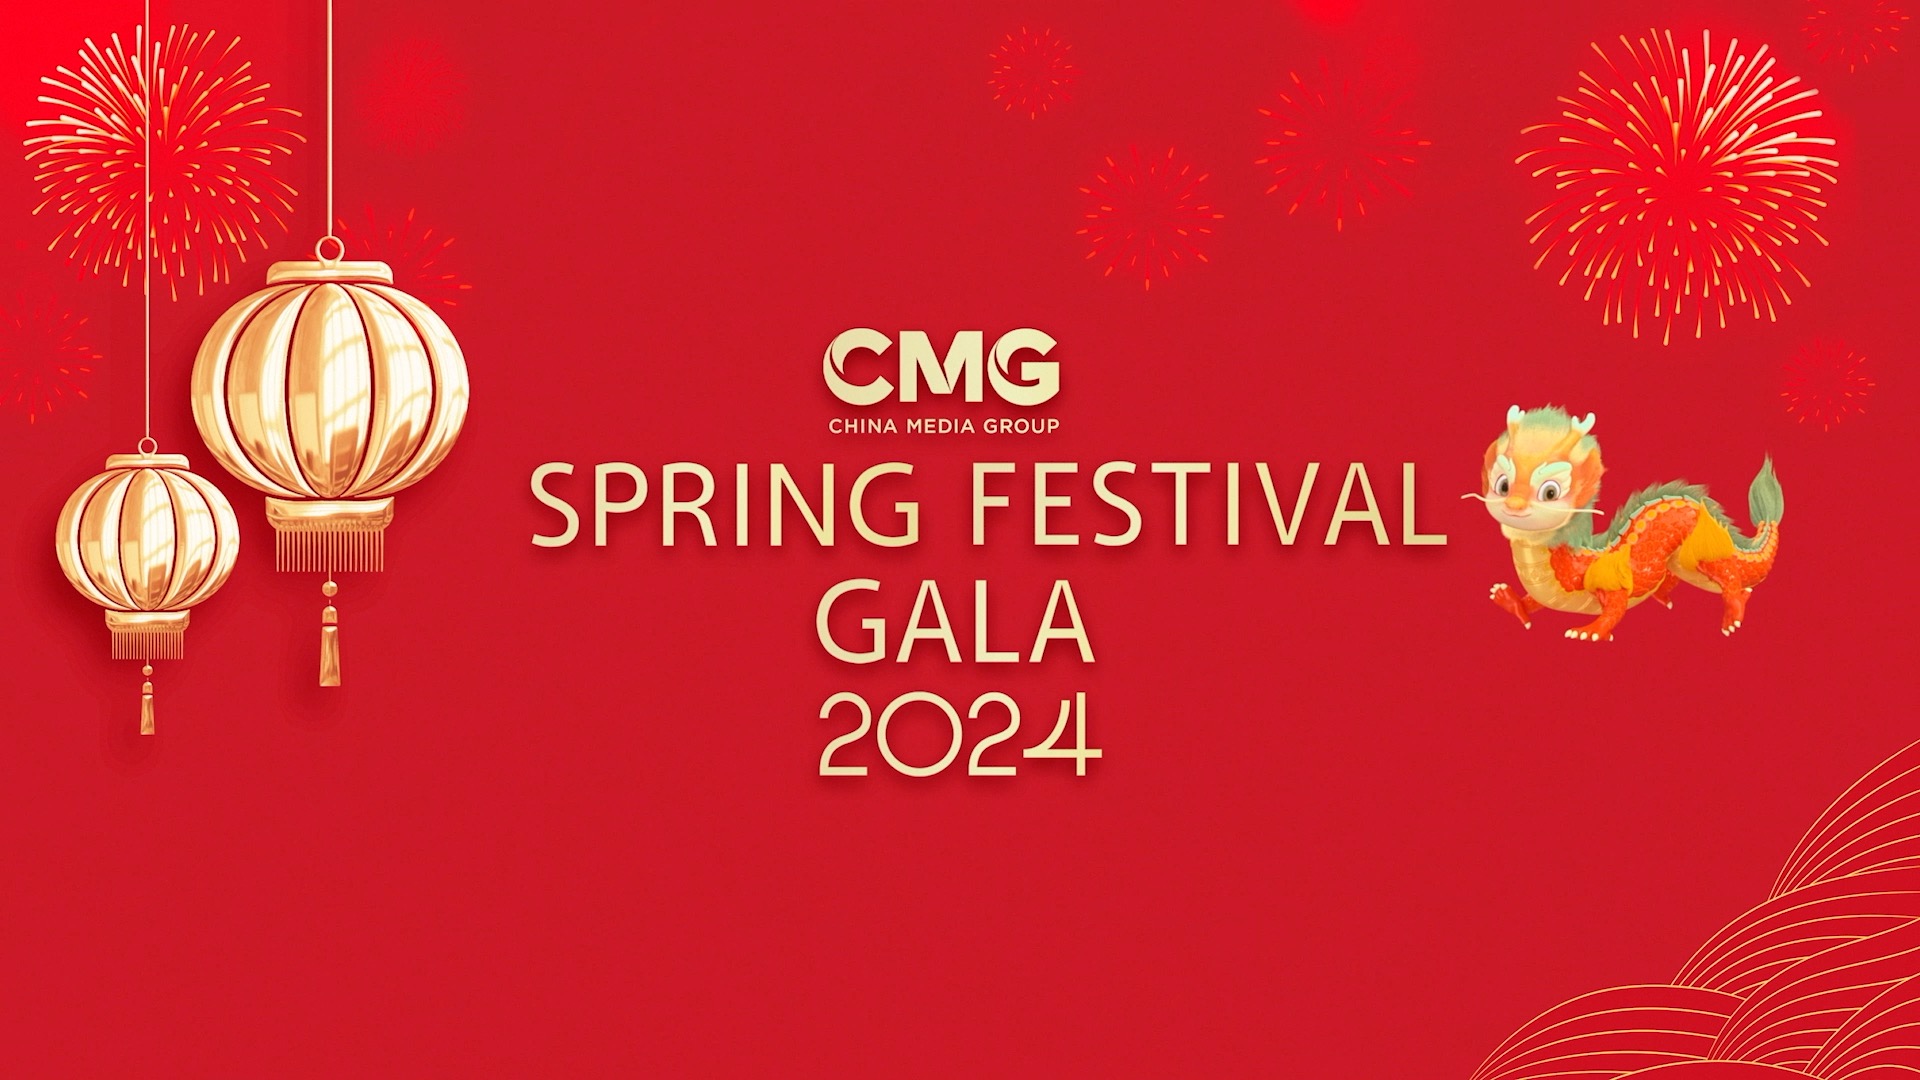 Promotion video for 2024 Spring Festival Gala CGTN